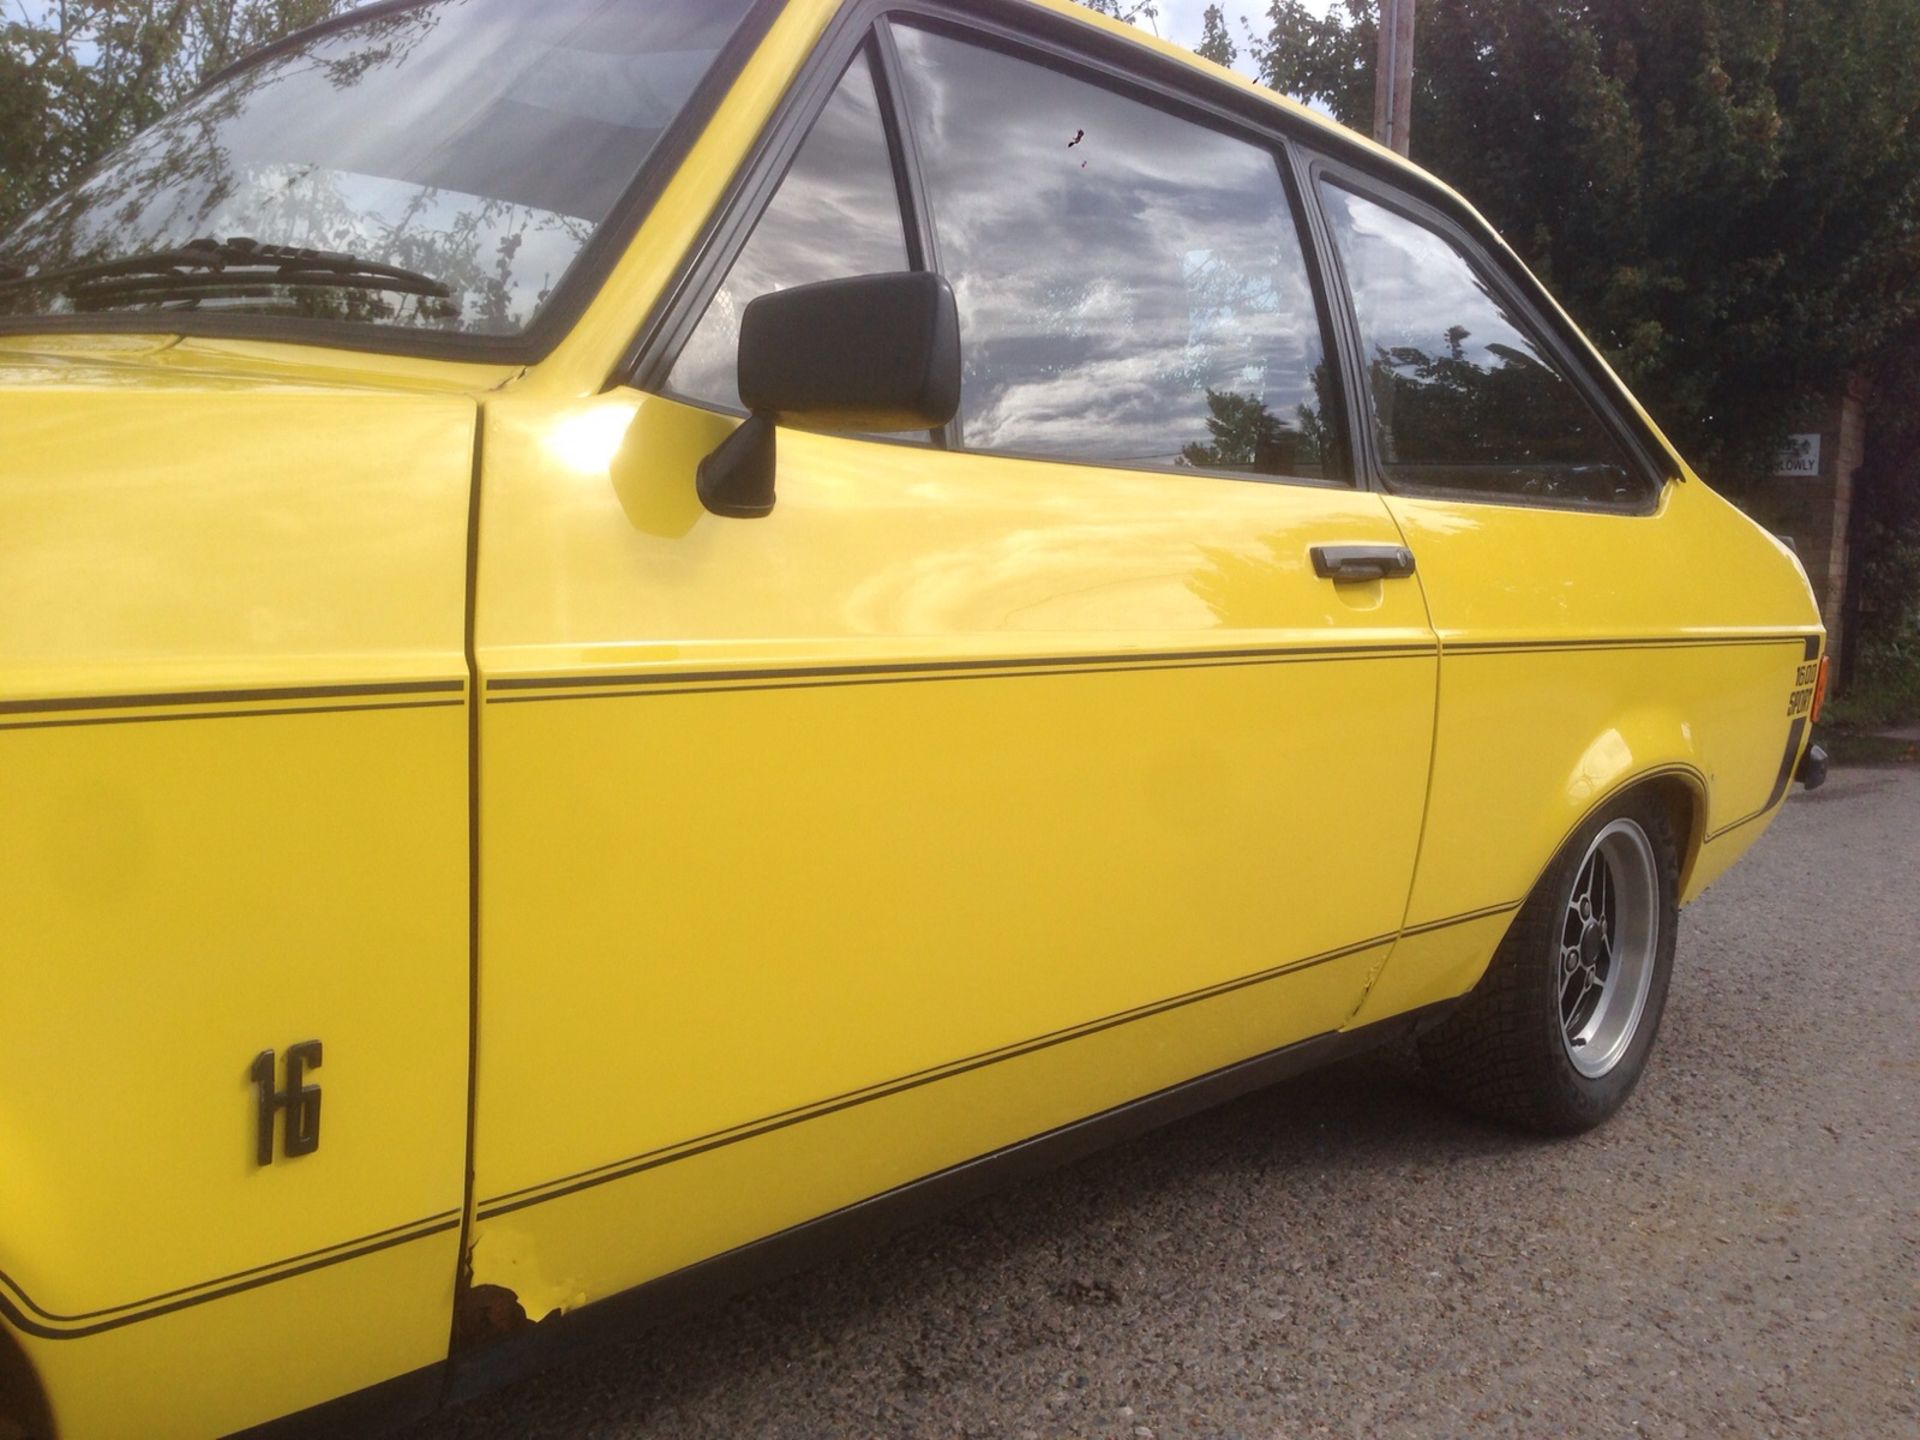 1979/T Ford Escort mk2 1600 Sport - in Signal yellow -  UK car  (545 miles) since rebuild - Image 19 of 54